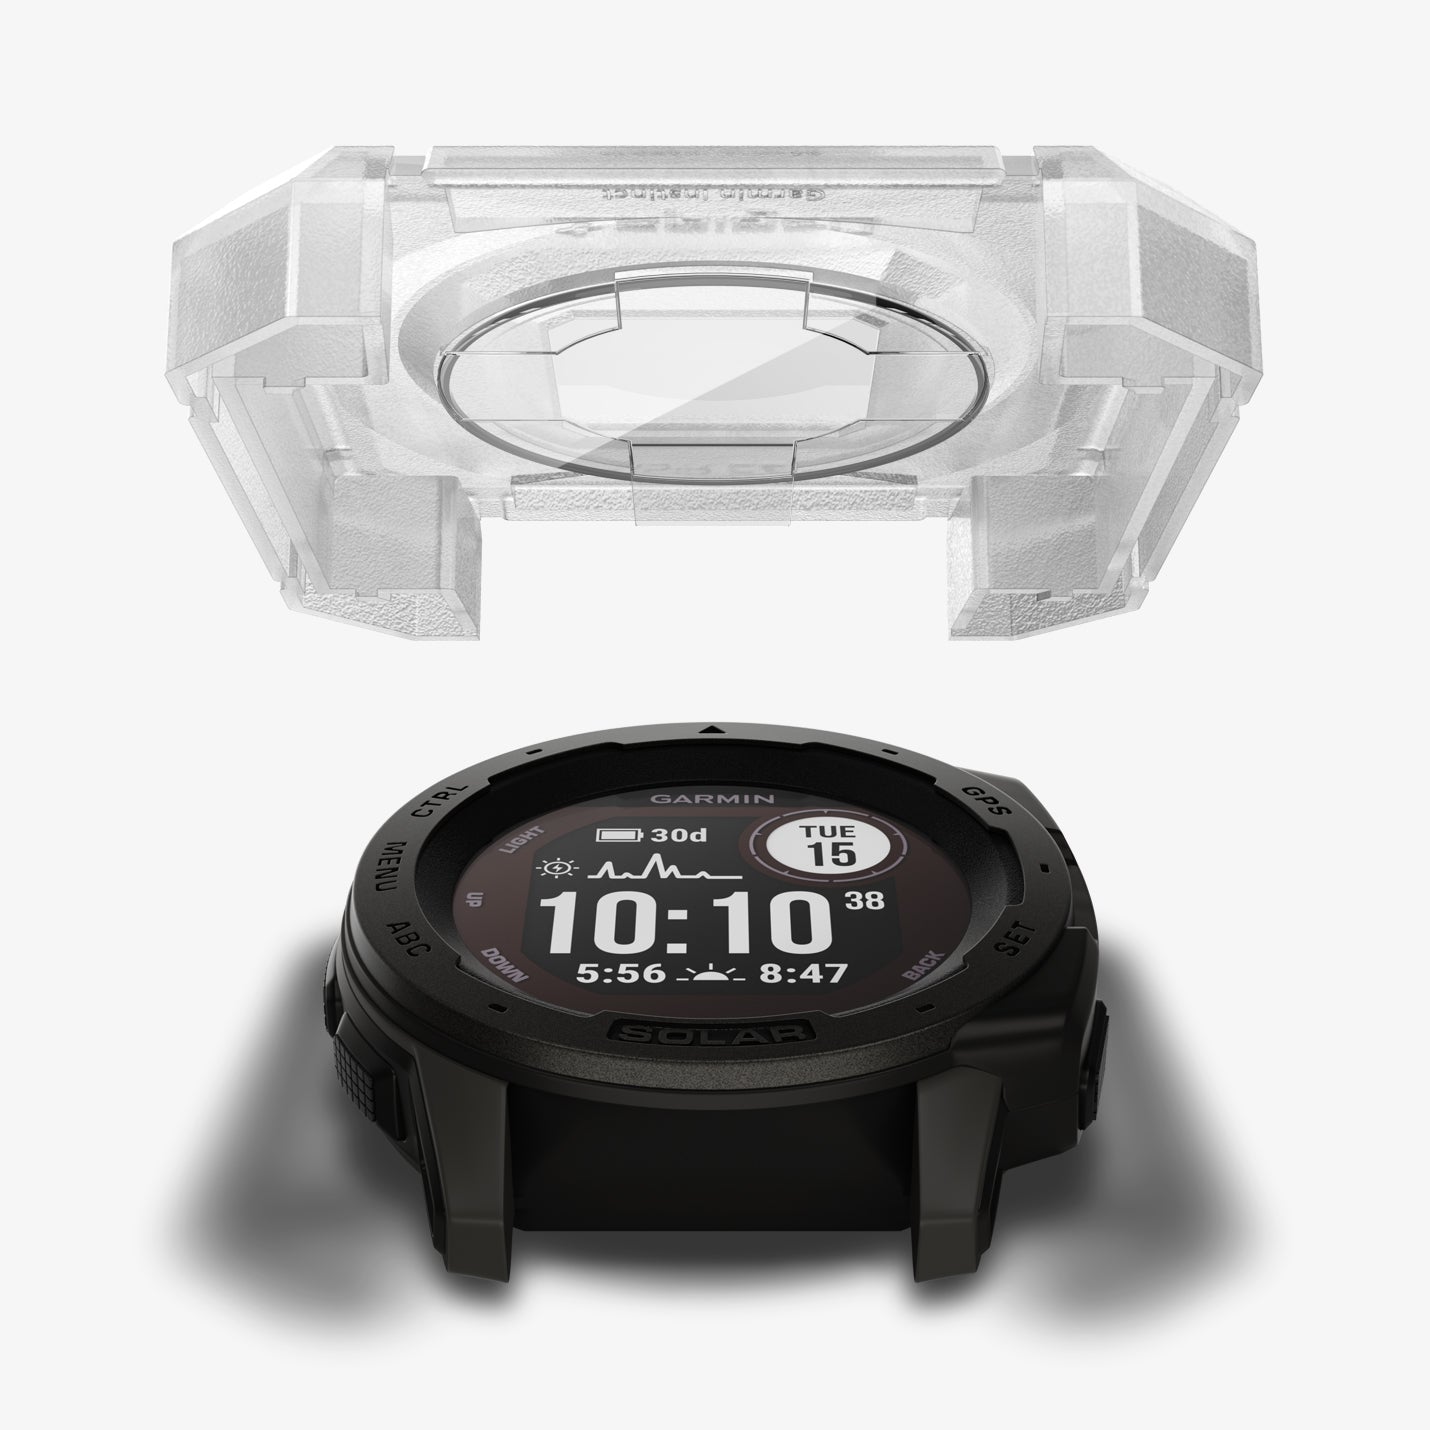 AGL02994 - Garmin Instinct Screen Protector EZ FIT Glas.tR showing the ez fit tray hovering above the watch face